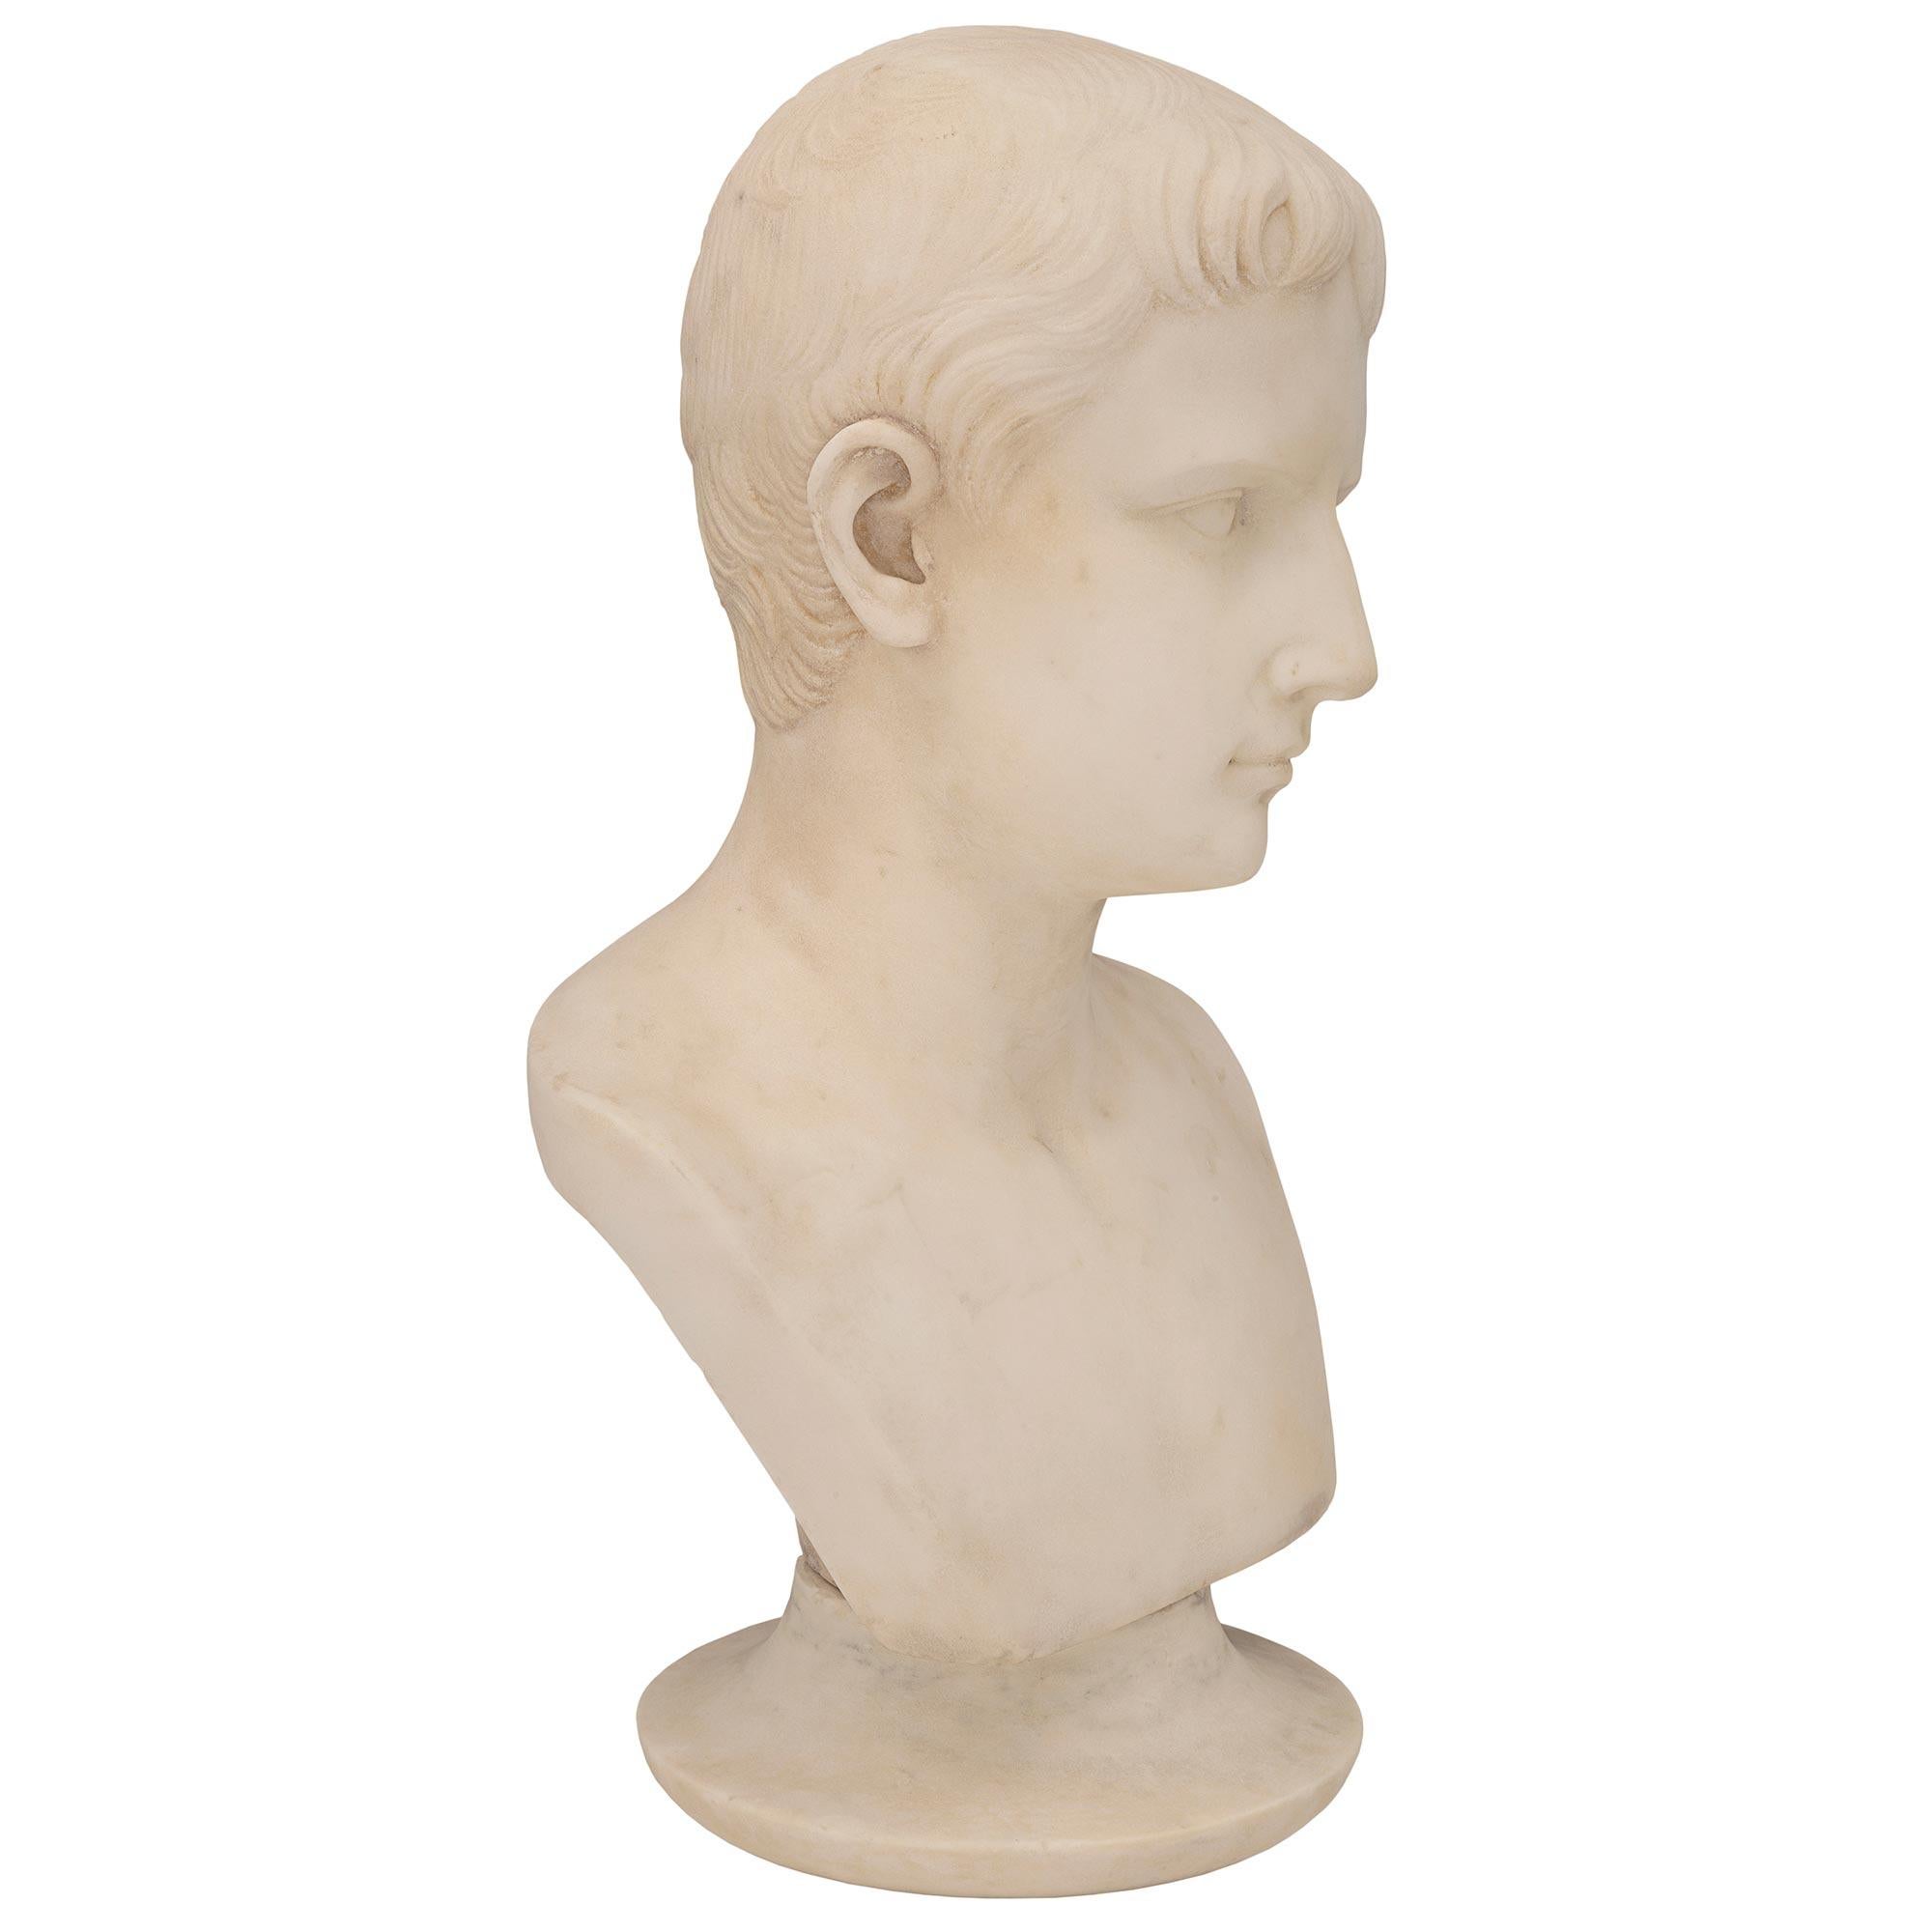 A handsome and finely detailed Italian 19th century white Carrara marble bust of a young August of Prima Porta. The bust of Augustus, also known as Julius Caesar, is raised by a mottled circular base. Above is the wonderfully executed bust of